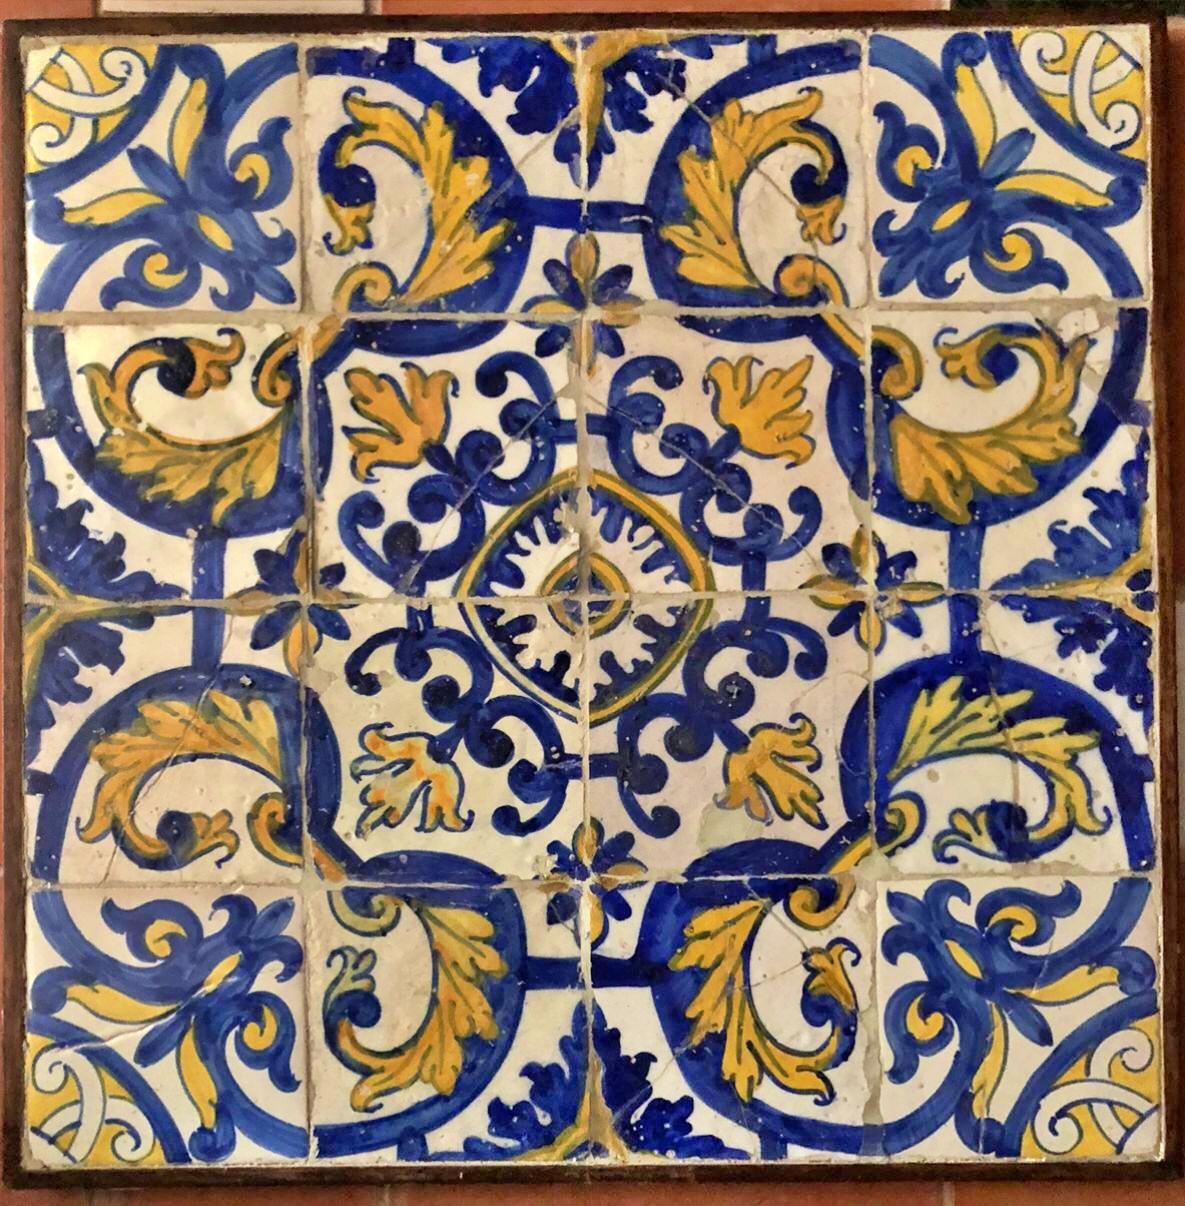 Hand-Crafted 17th century Portuguese Tile Panel For Sale